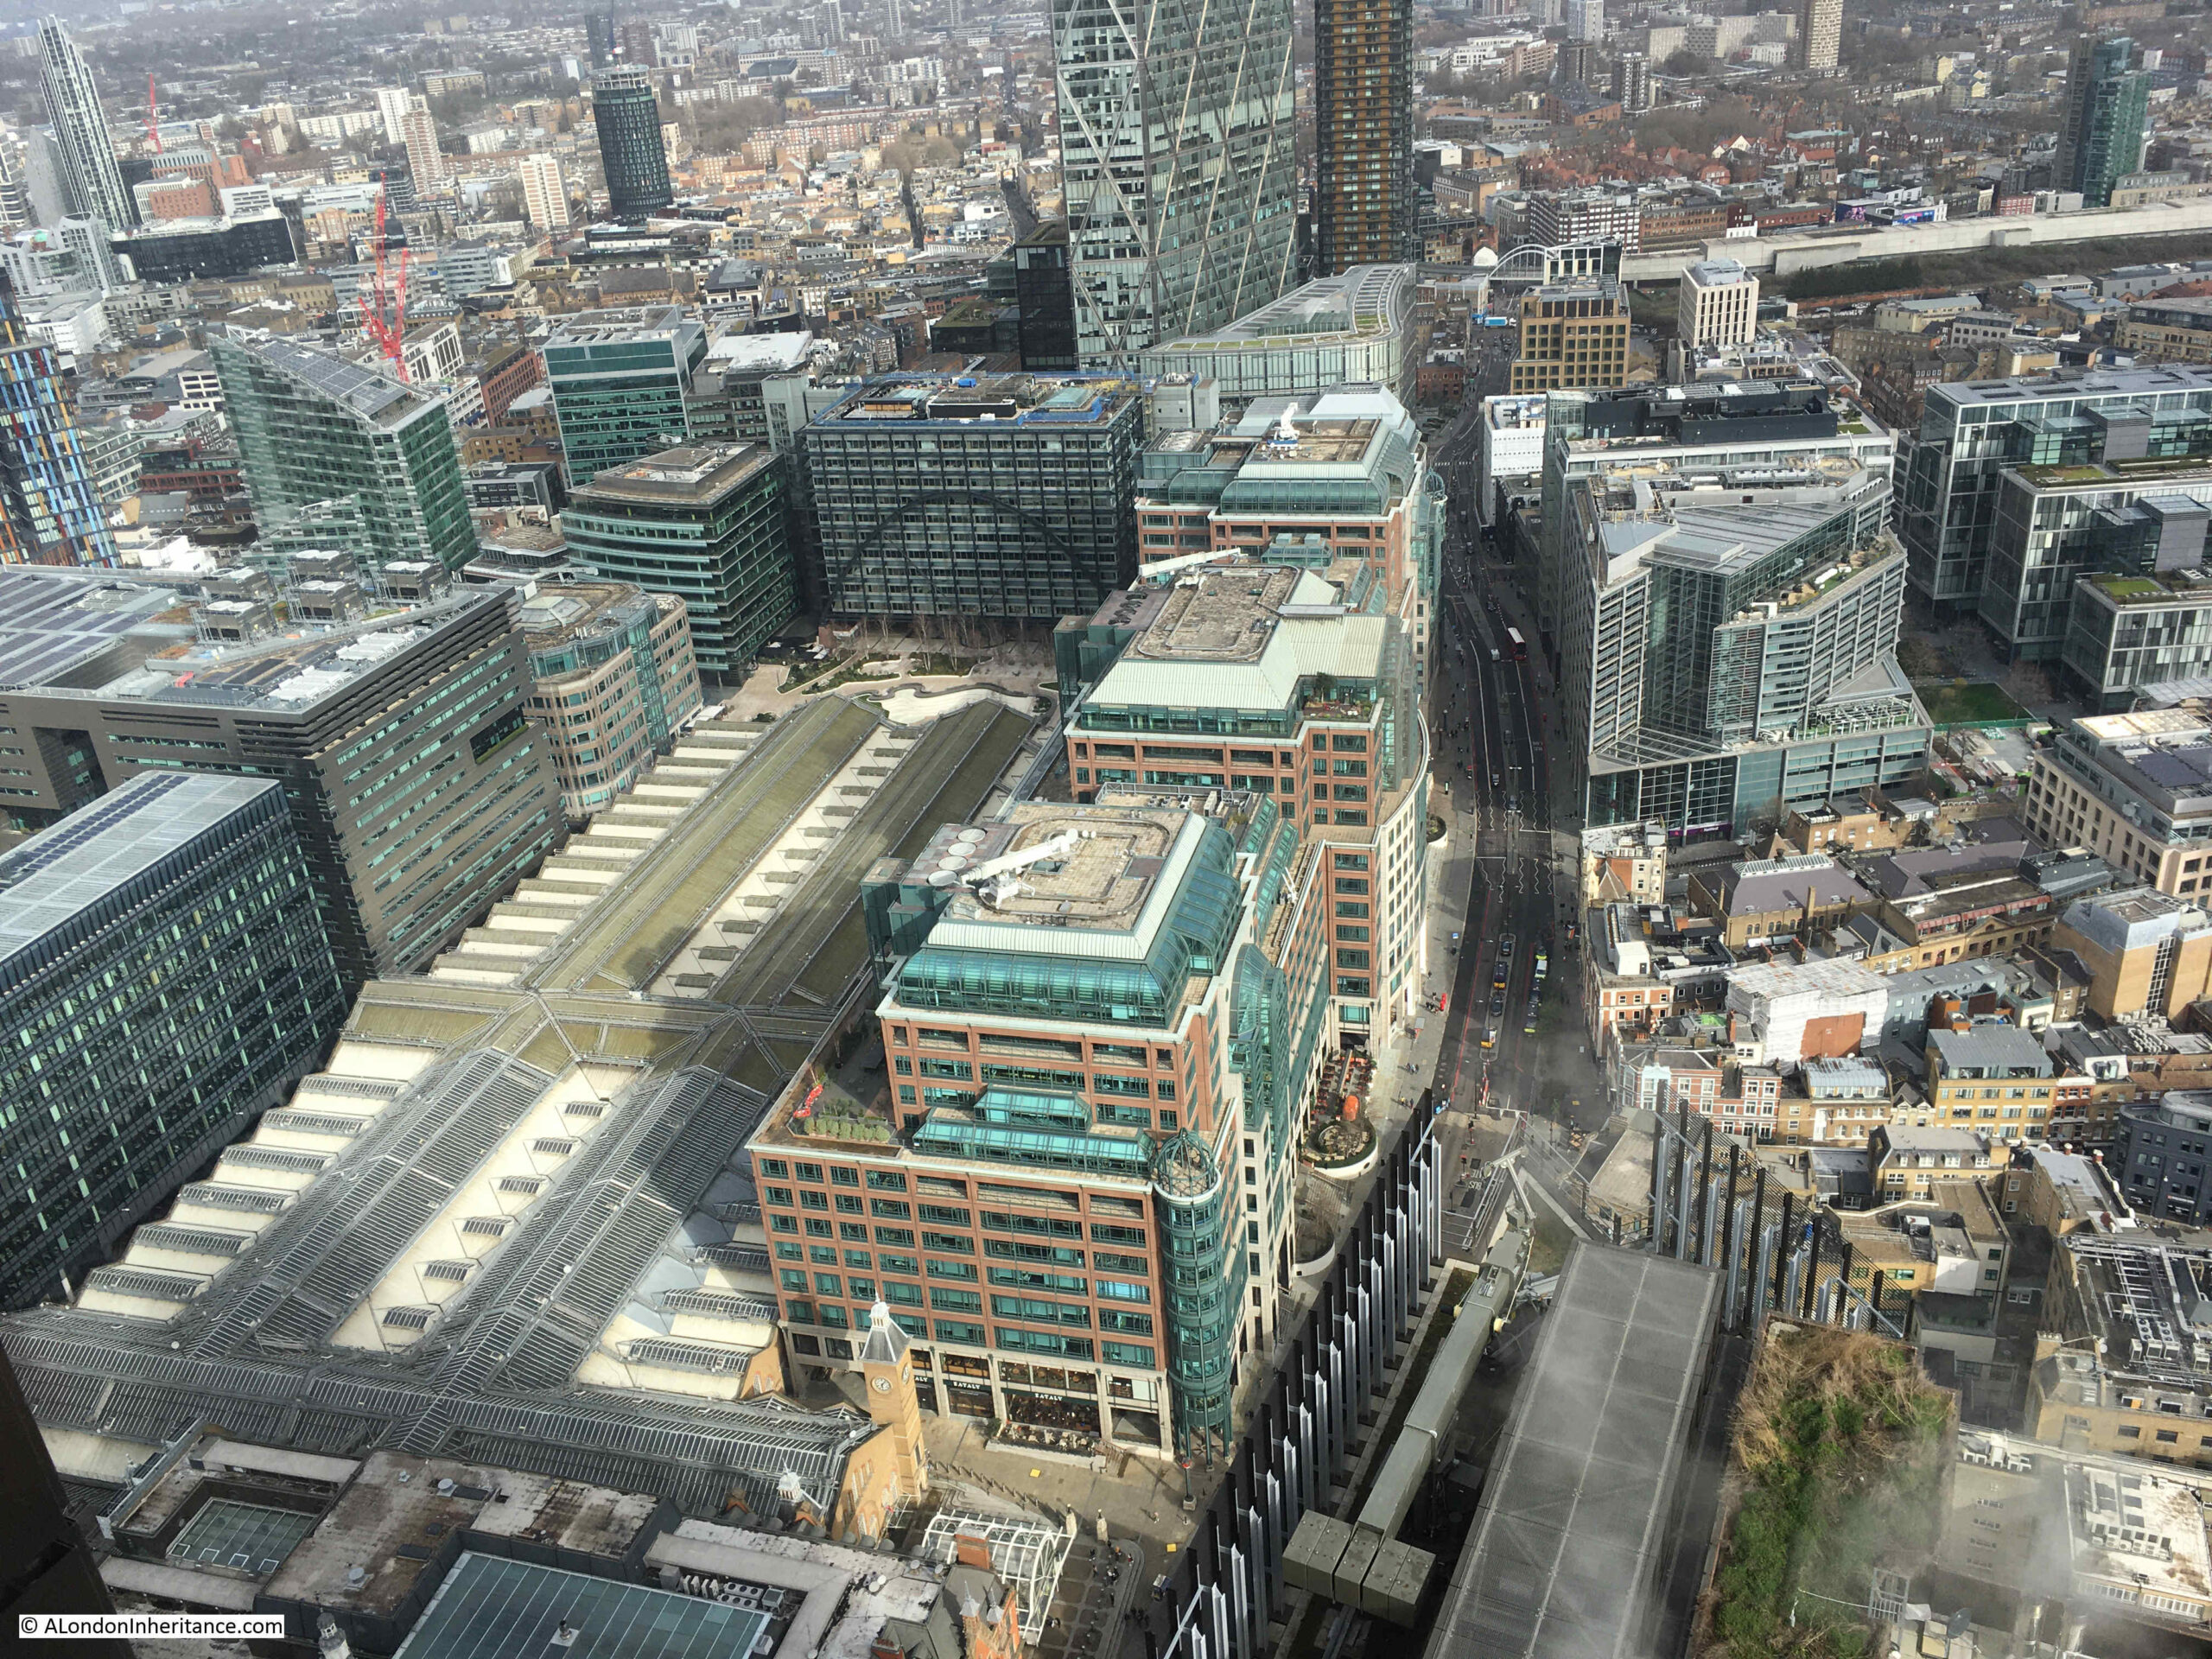 View from the Heron Tower